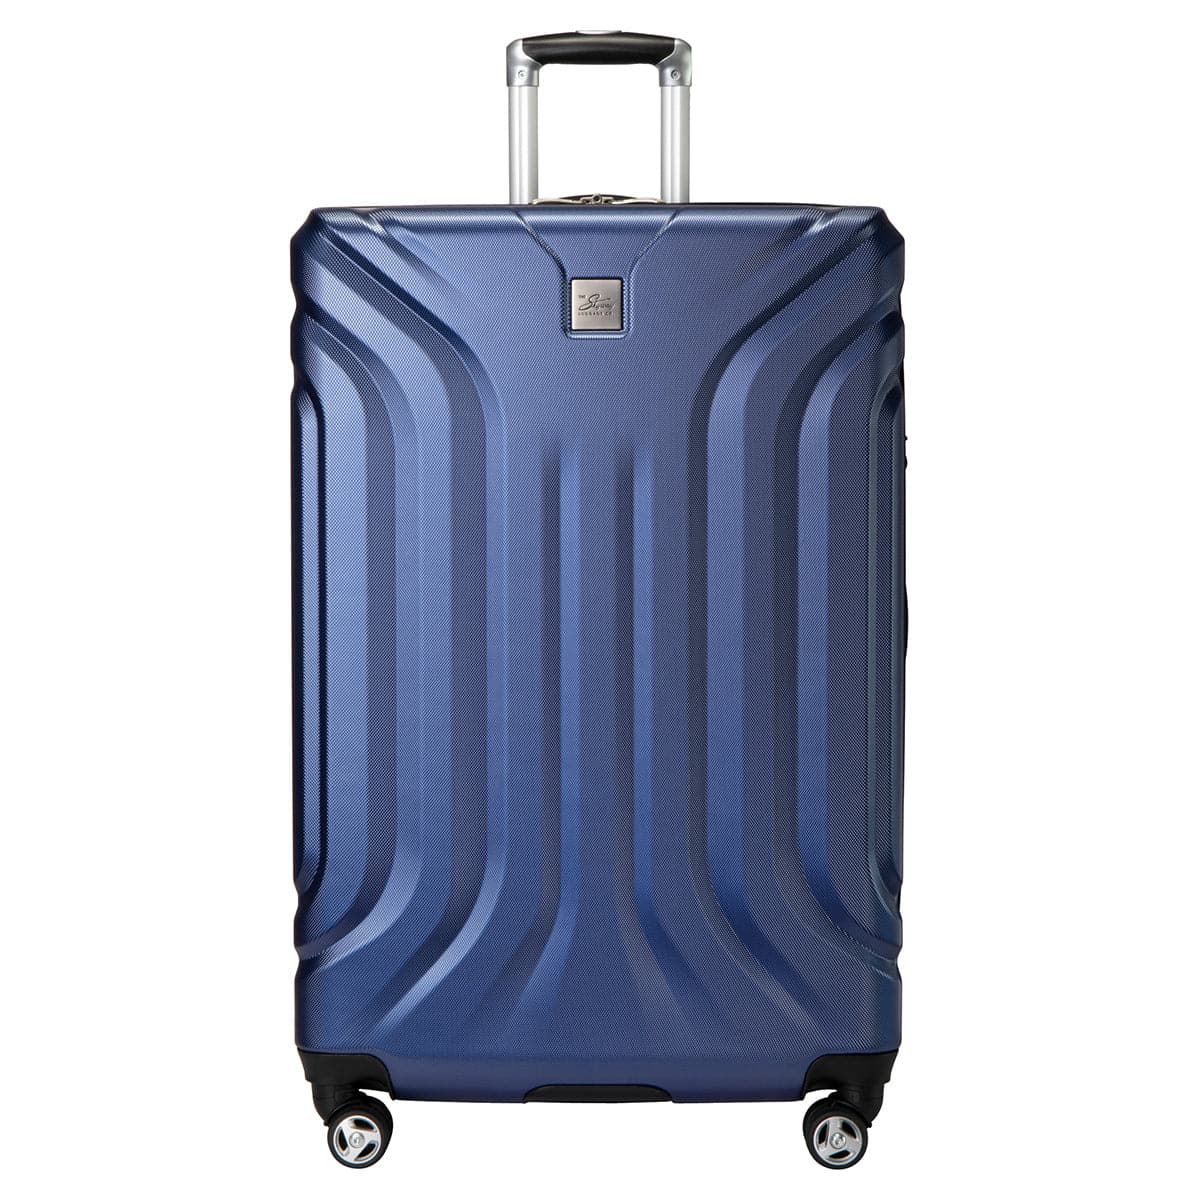 Skyway Nimbus 4.0 Hardside Expandable 28" Spinner Check-In Luggage